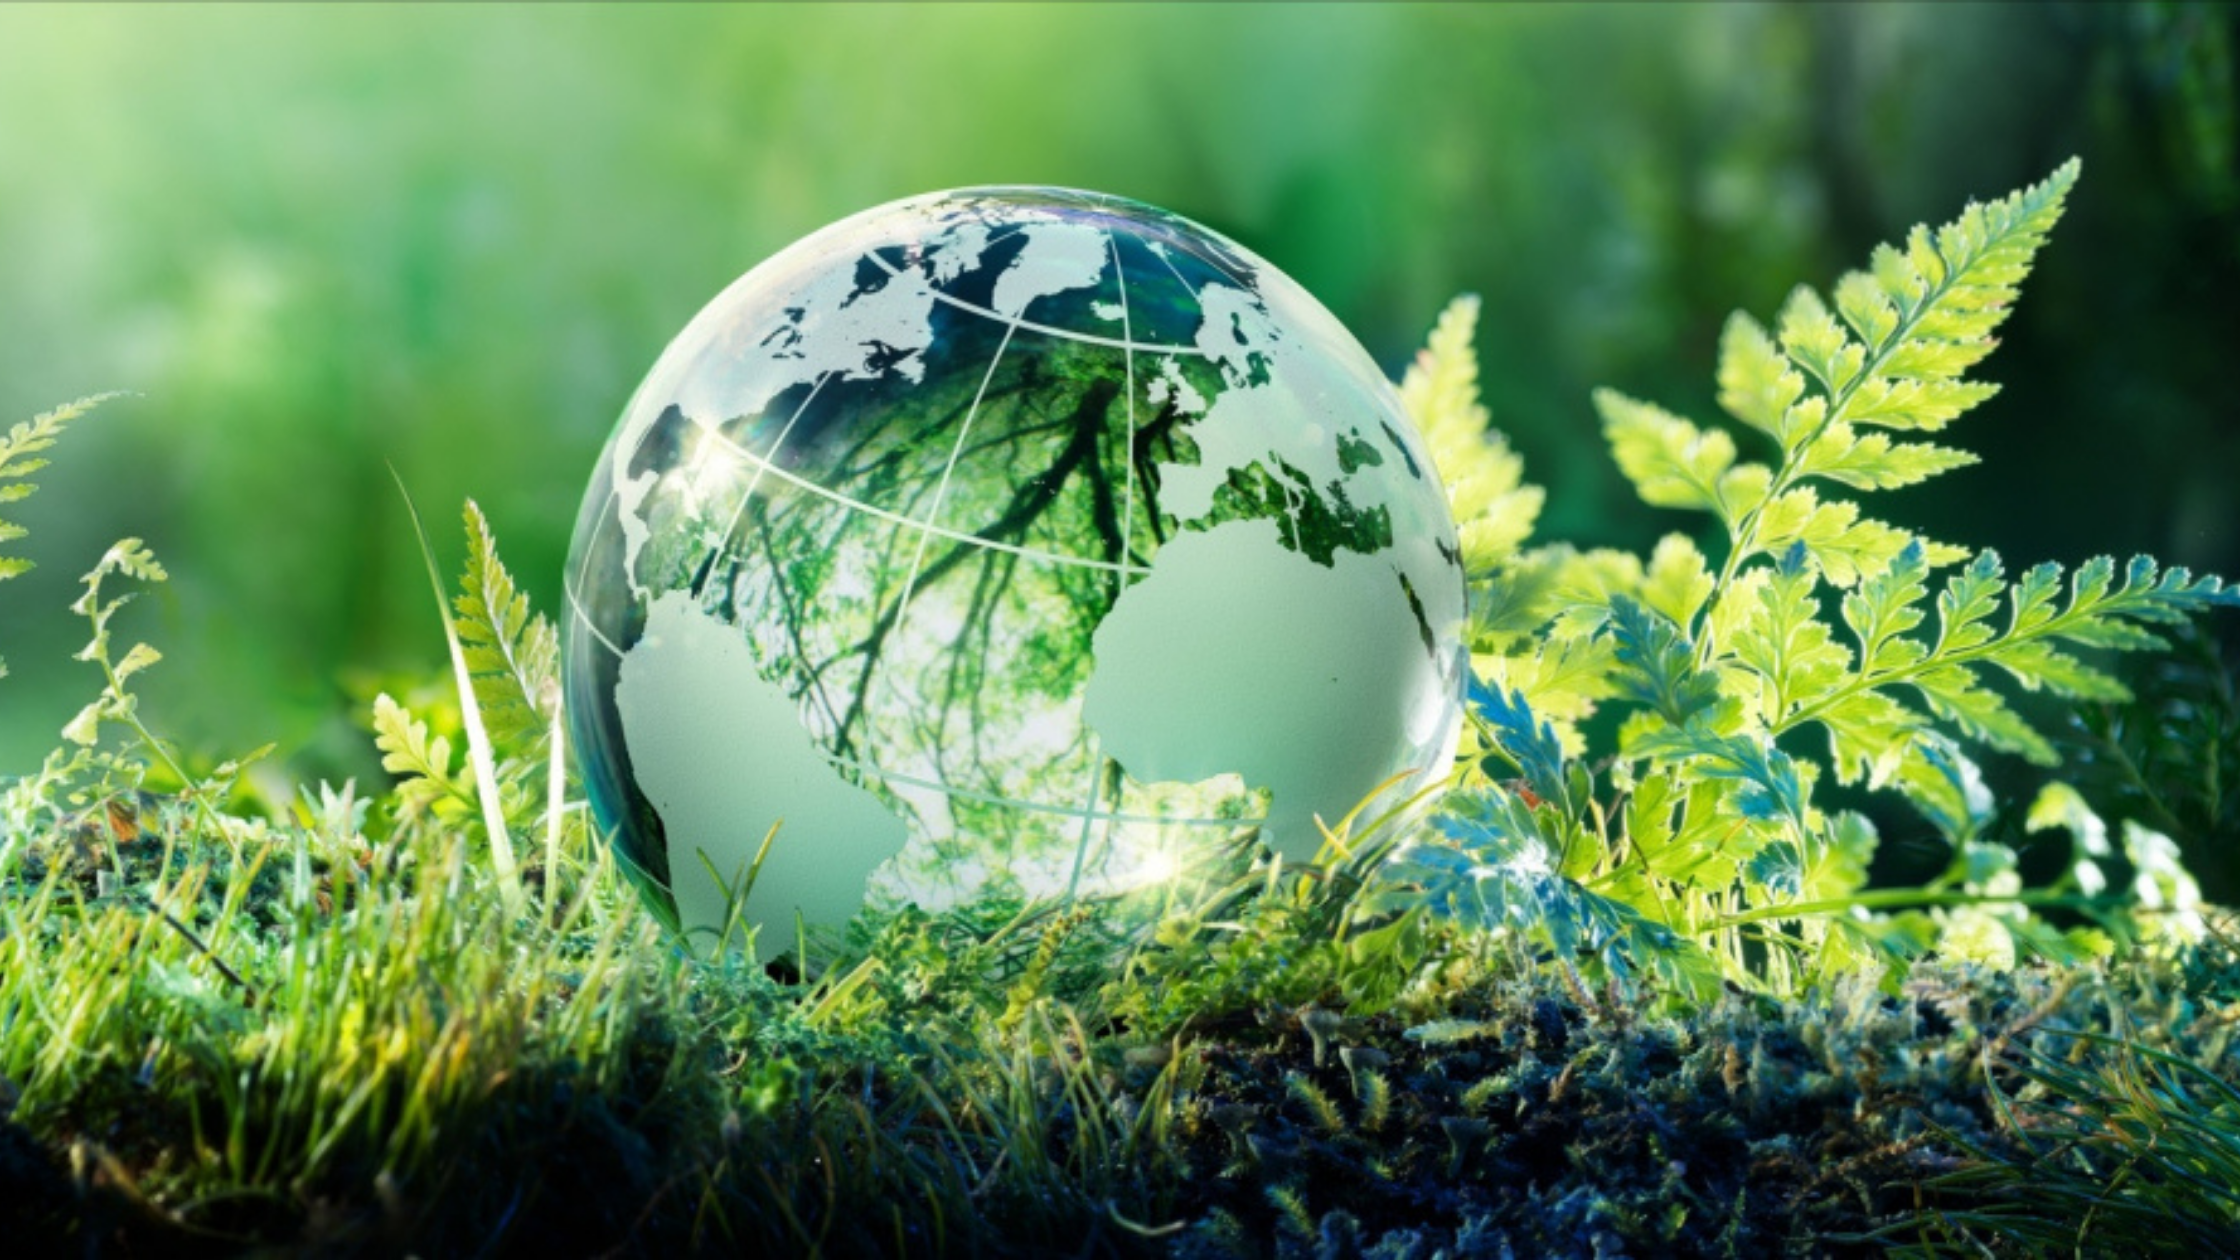 Glass globe placed among plant life. Image used to illustrate blog post on World Earth Day.